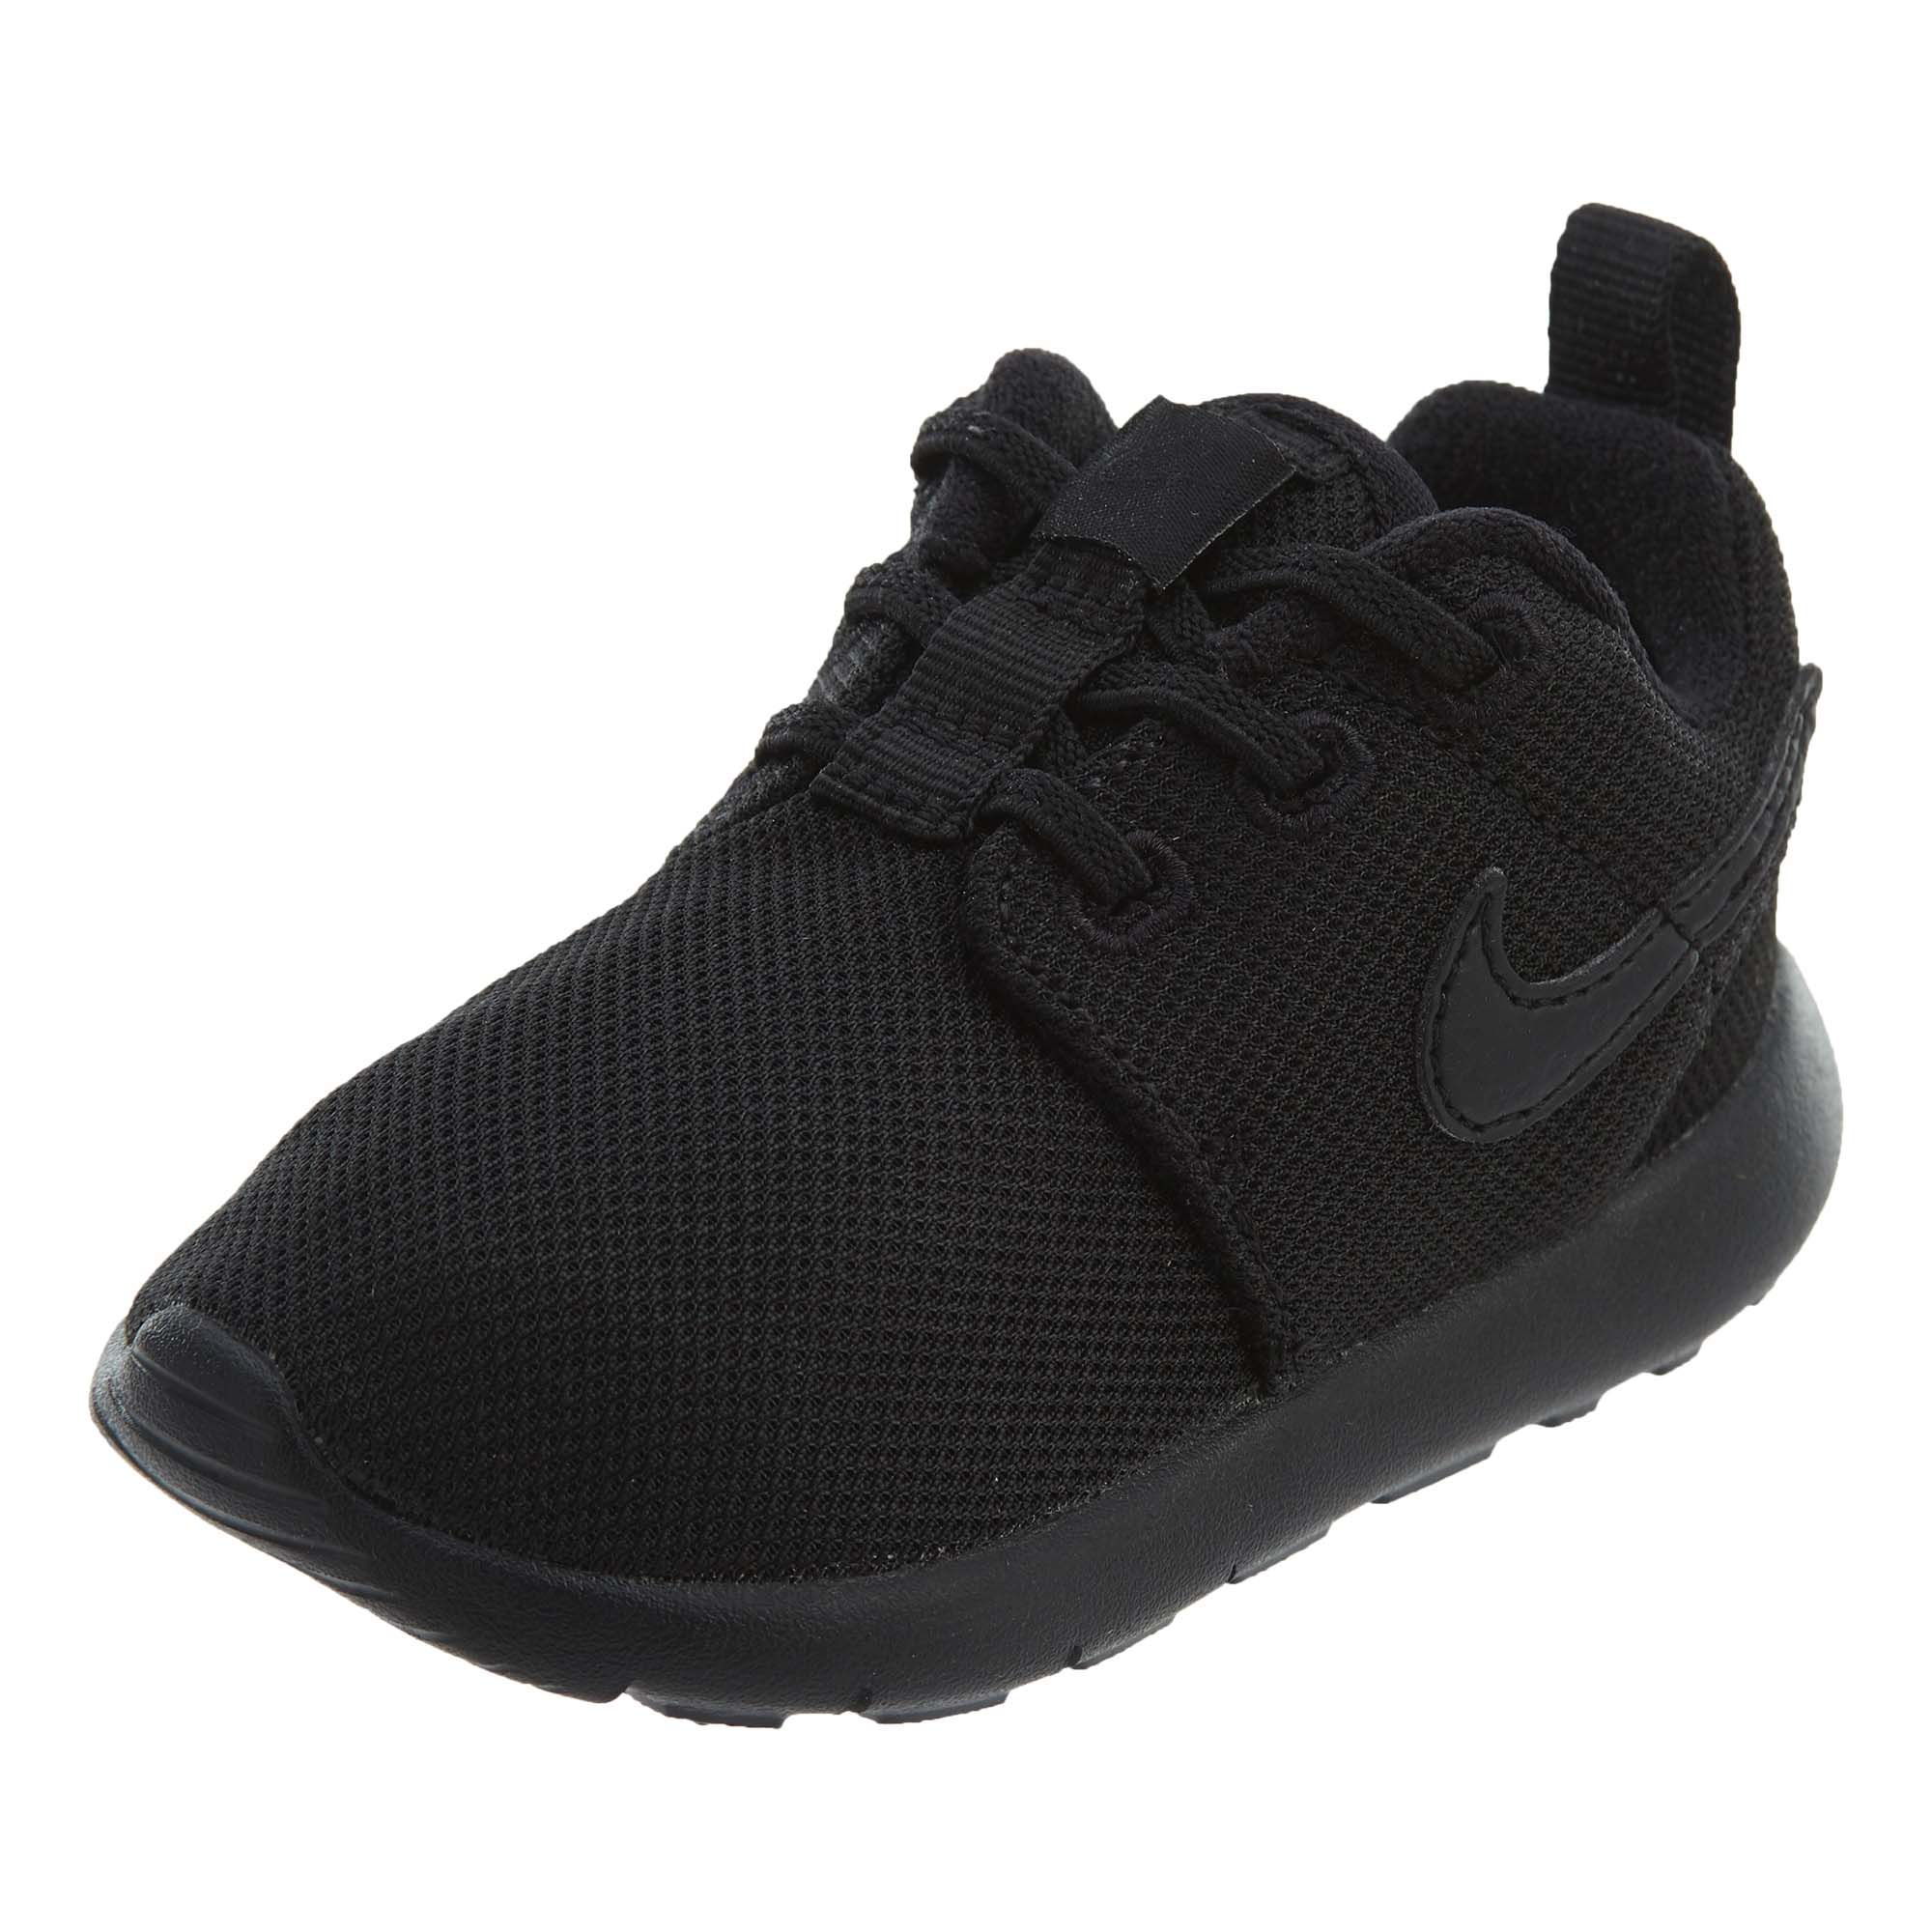 roshes for toddlers